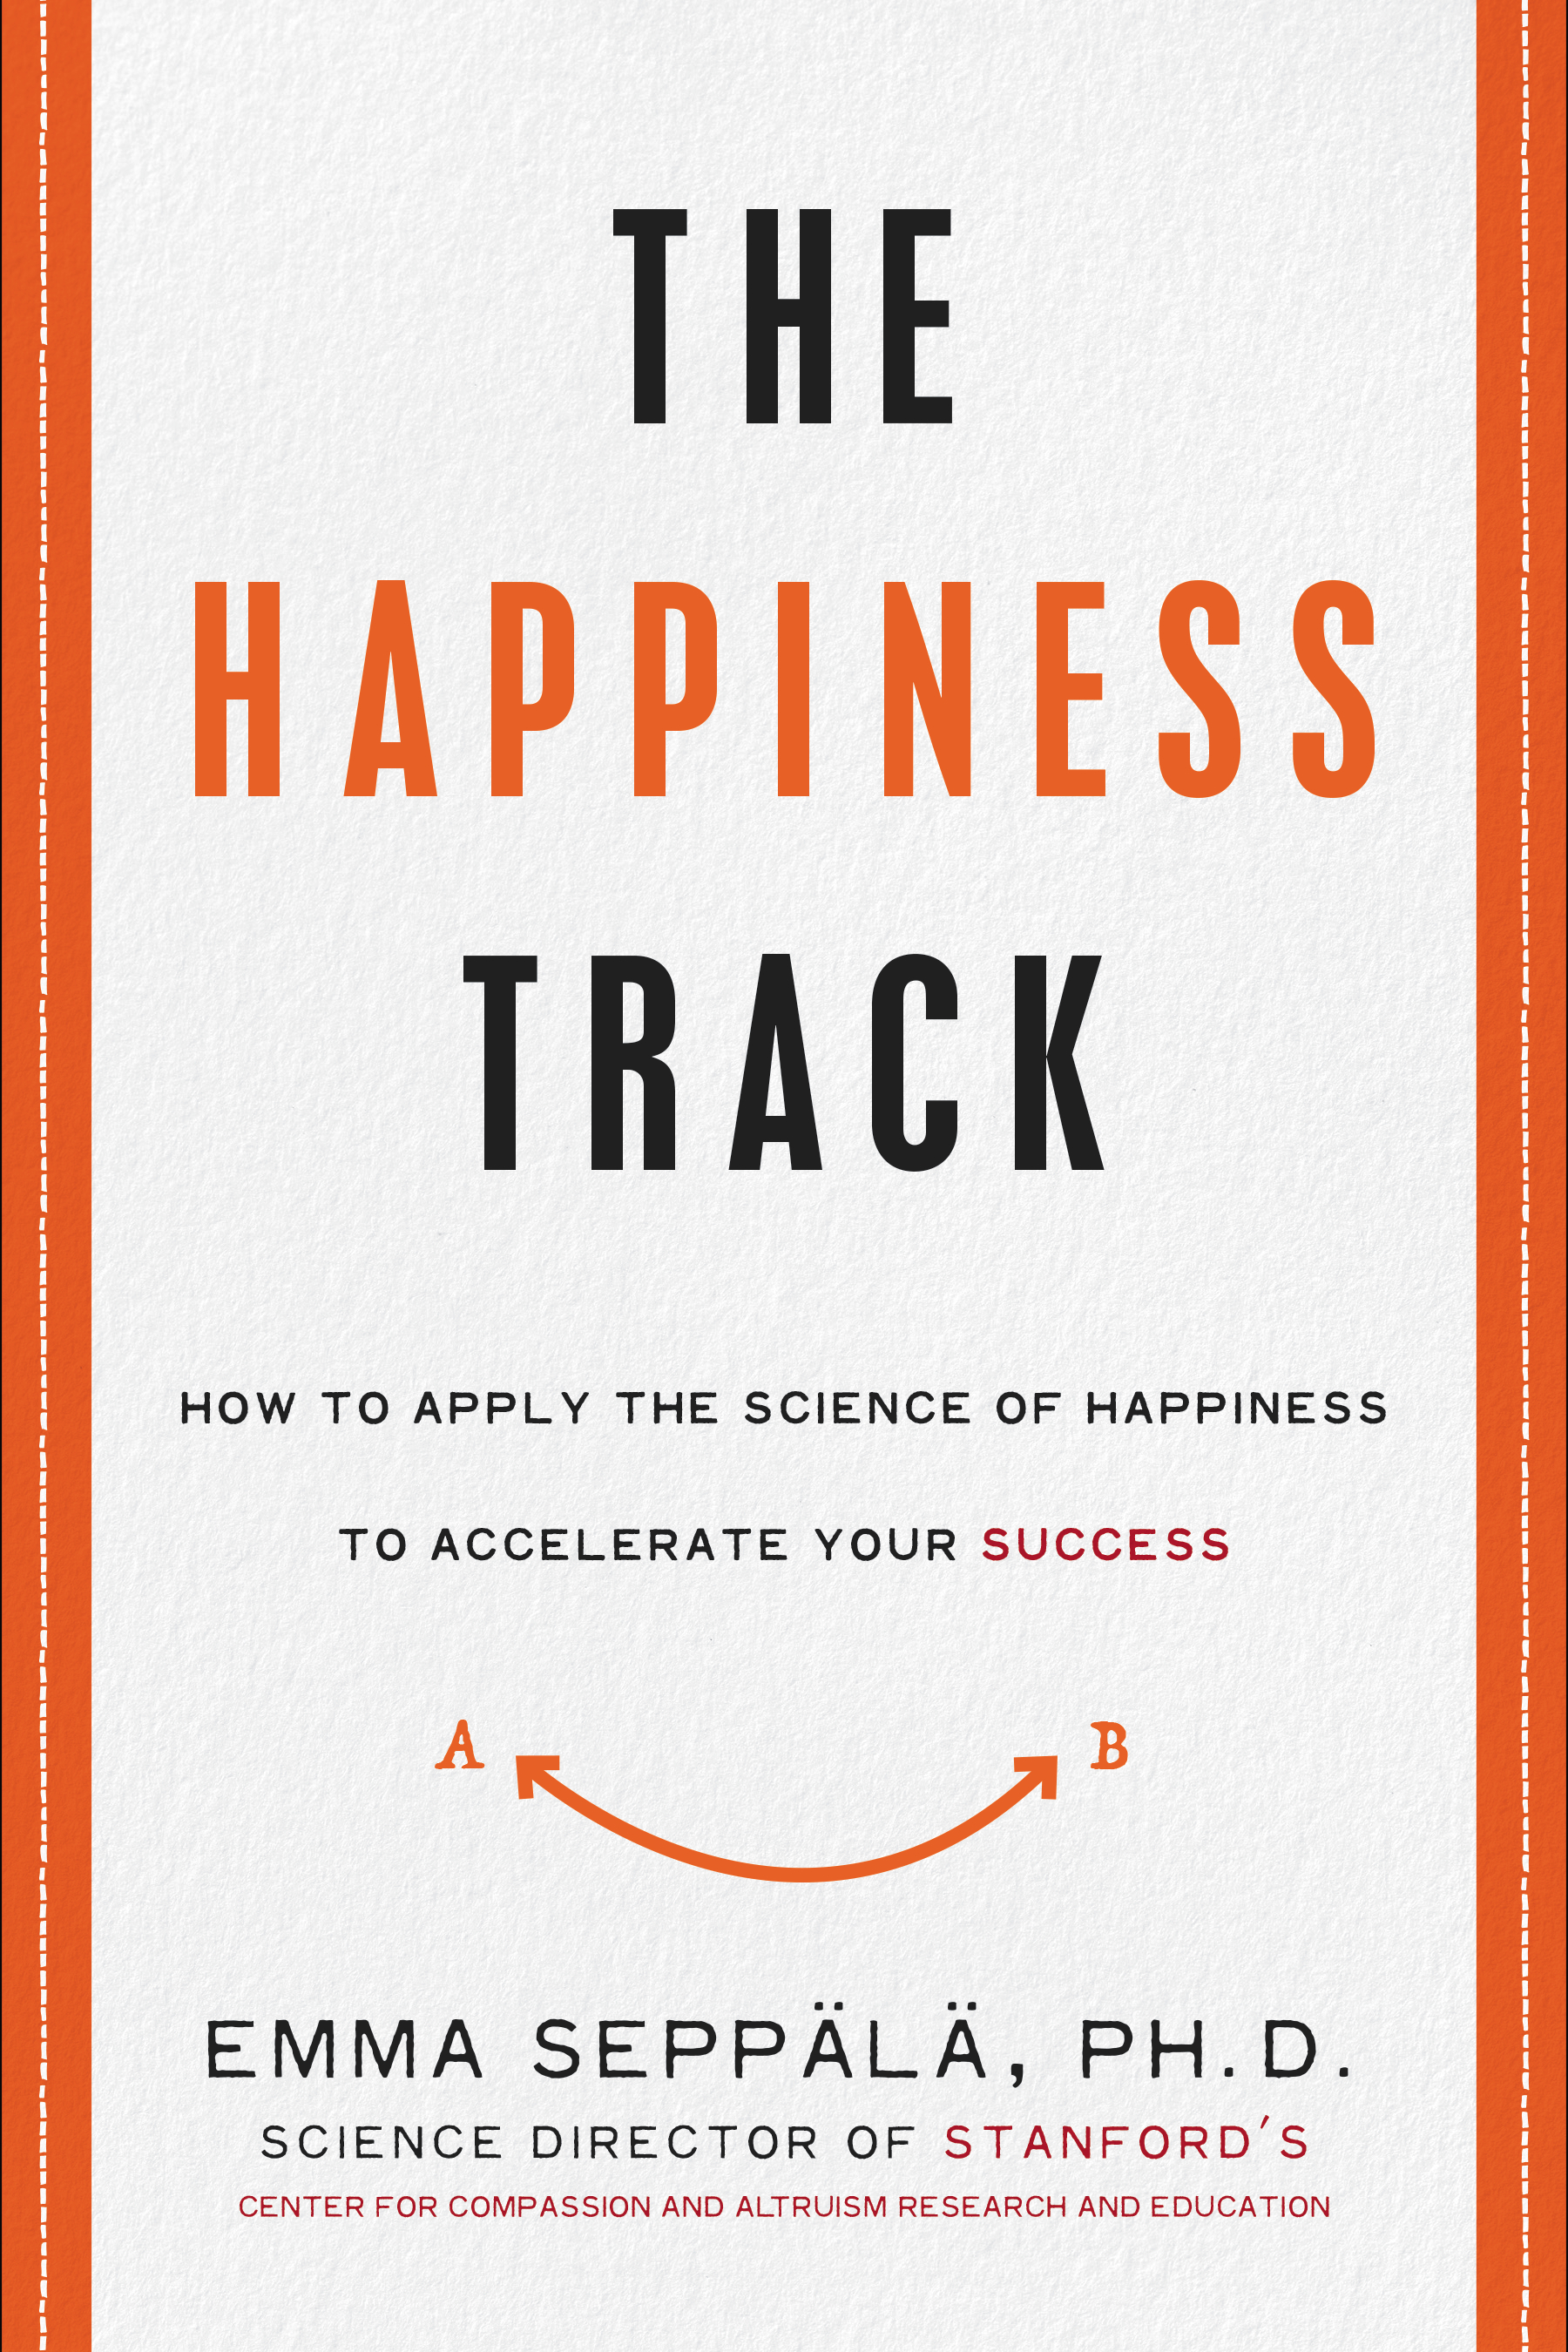 Happiness Track book cover copy